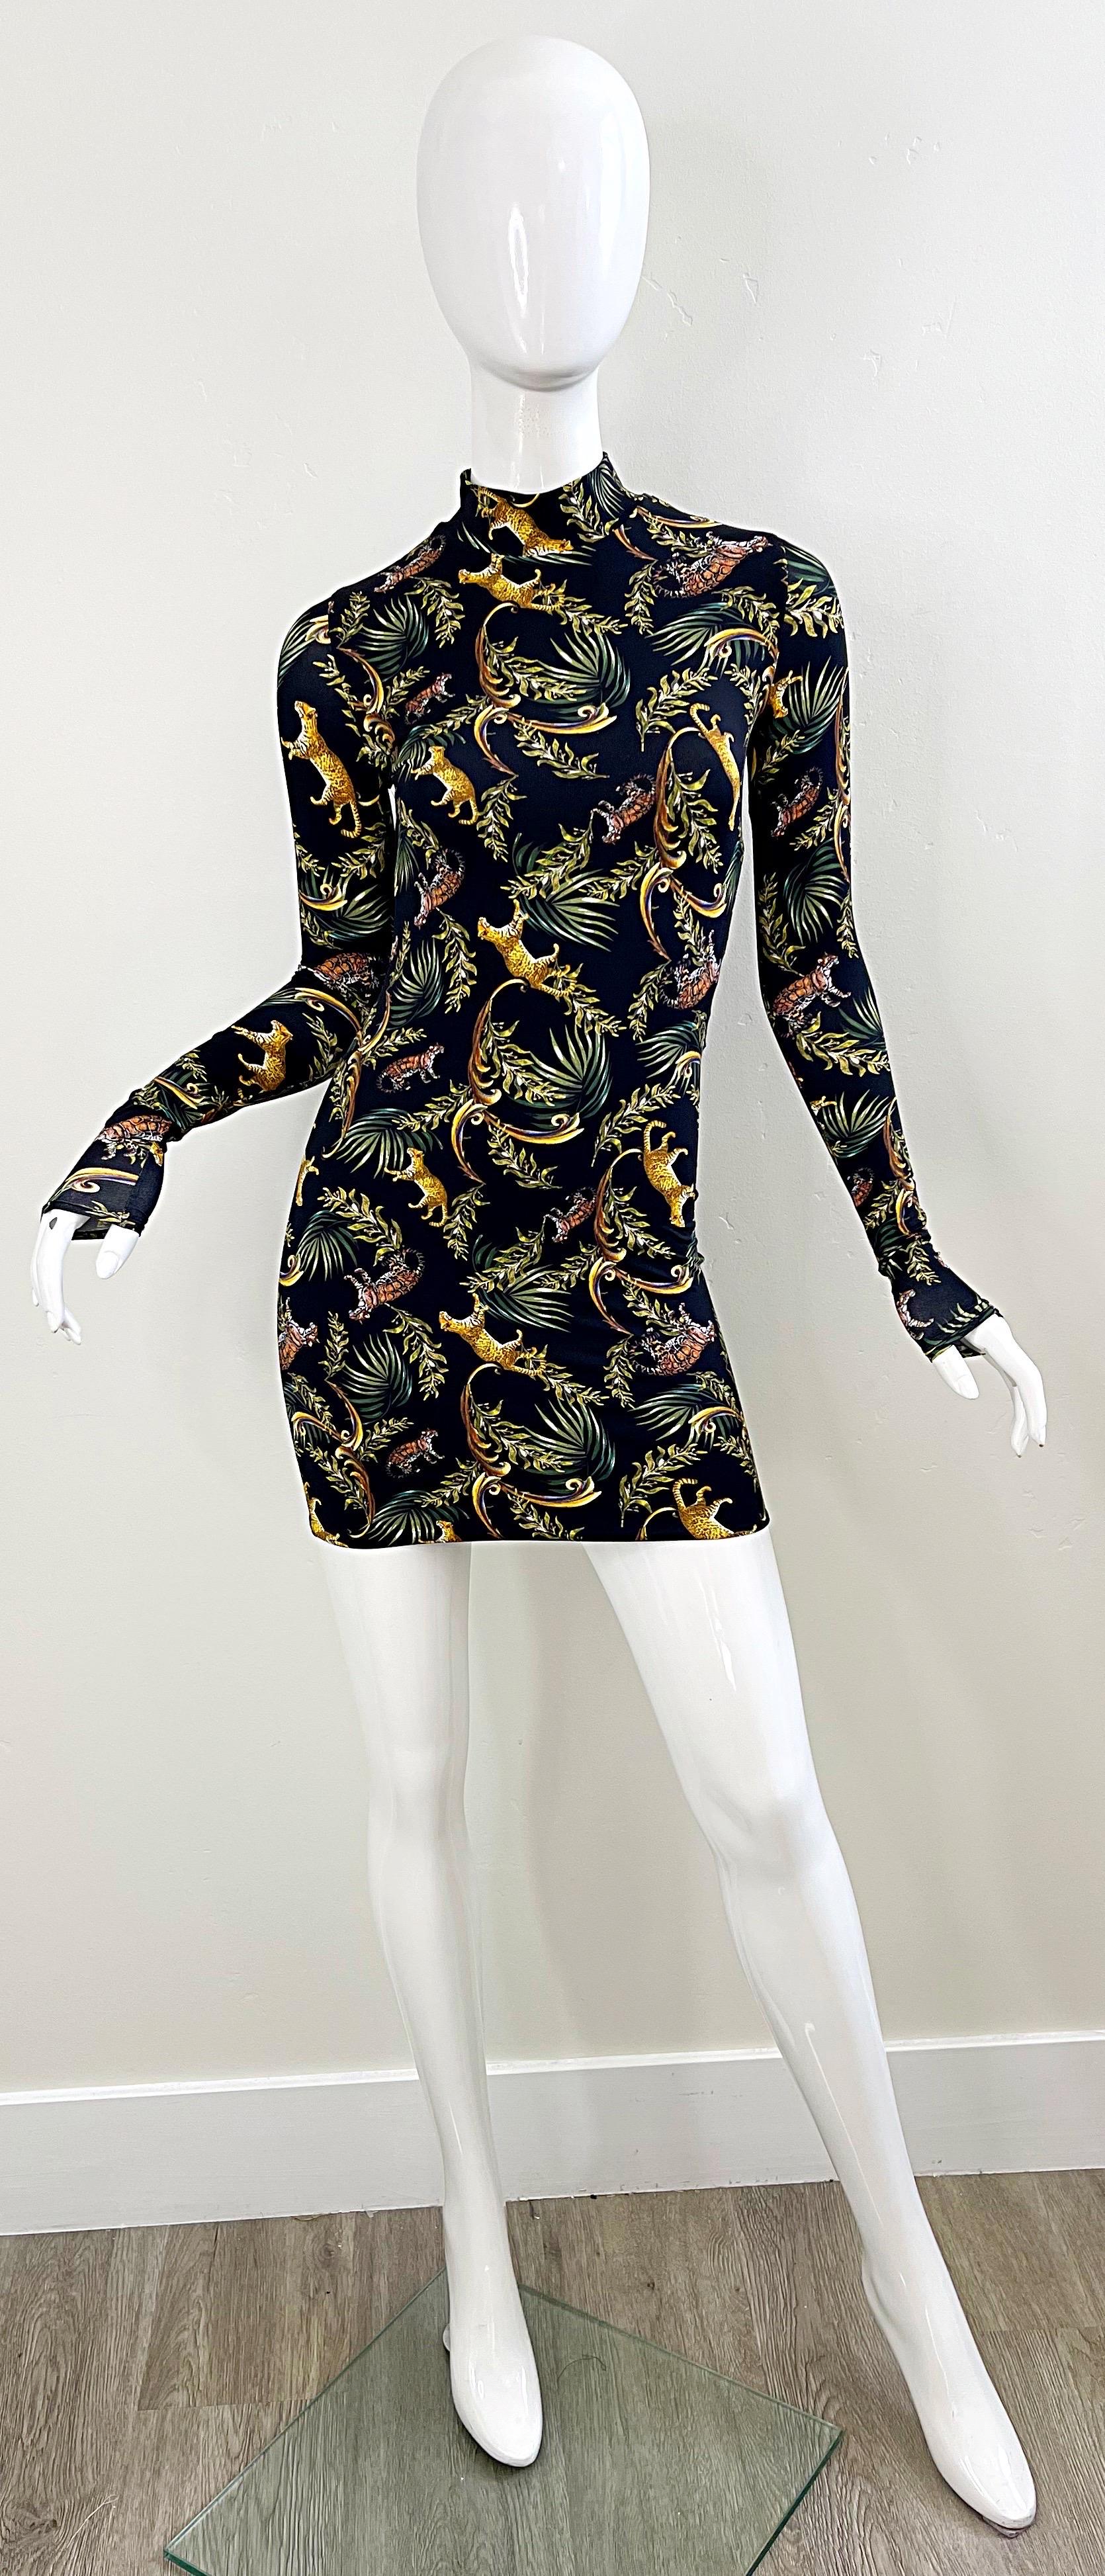 Sexy brand new ADRIANA IGLESIAS cheetah / leopard novelty print long sleeve bodcon mini dress ! Palm leaves printed amongst the cheetahs and leopards. Simply slips over the head, and stretches to fit. Pair with wedges, sandals or flats for day, or